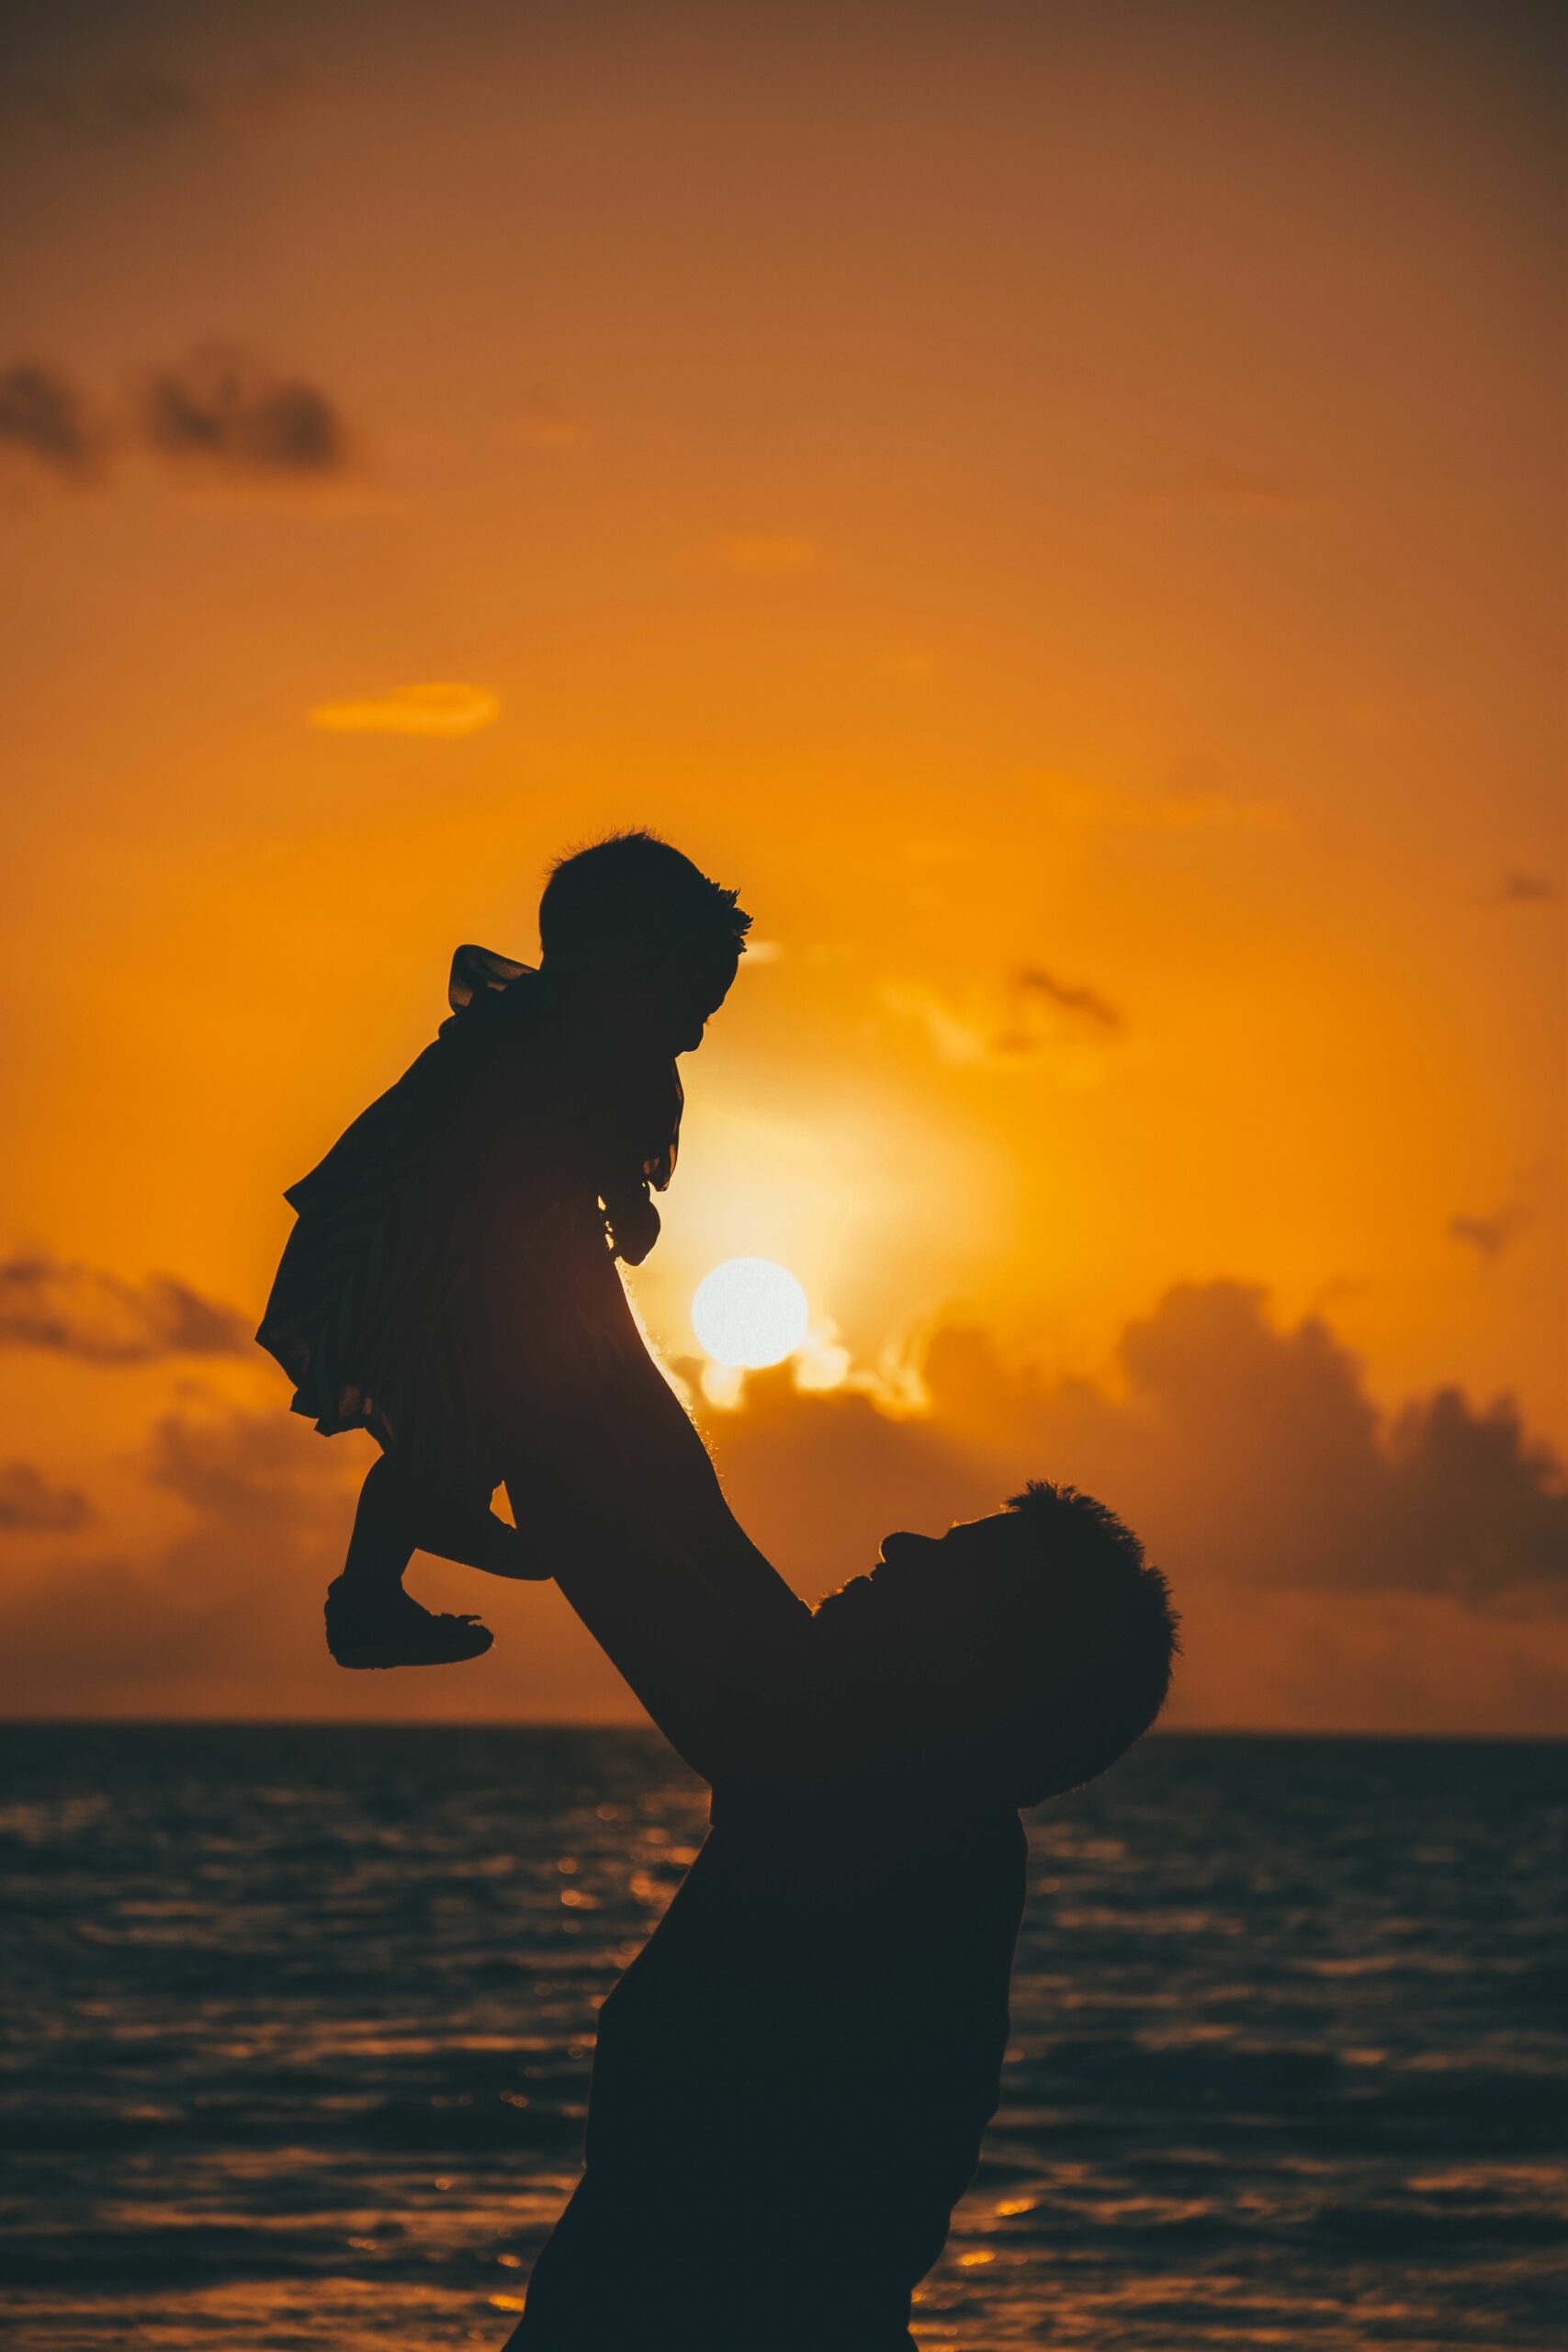 Godly Fathers – June 16, 2019